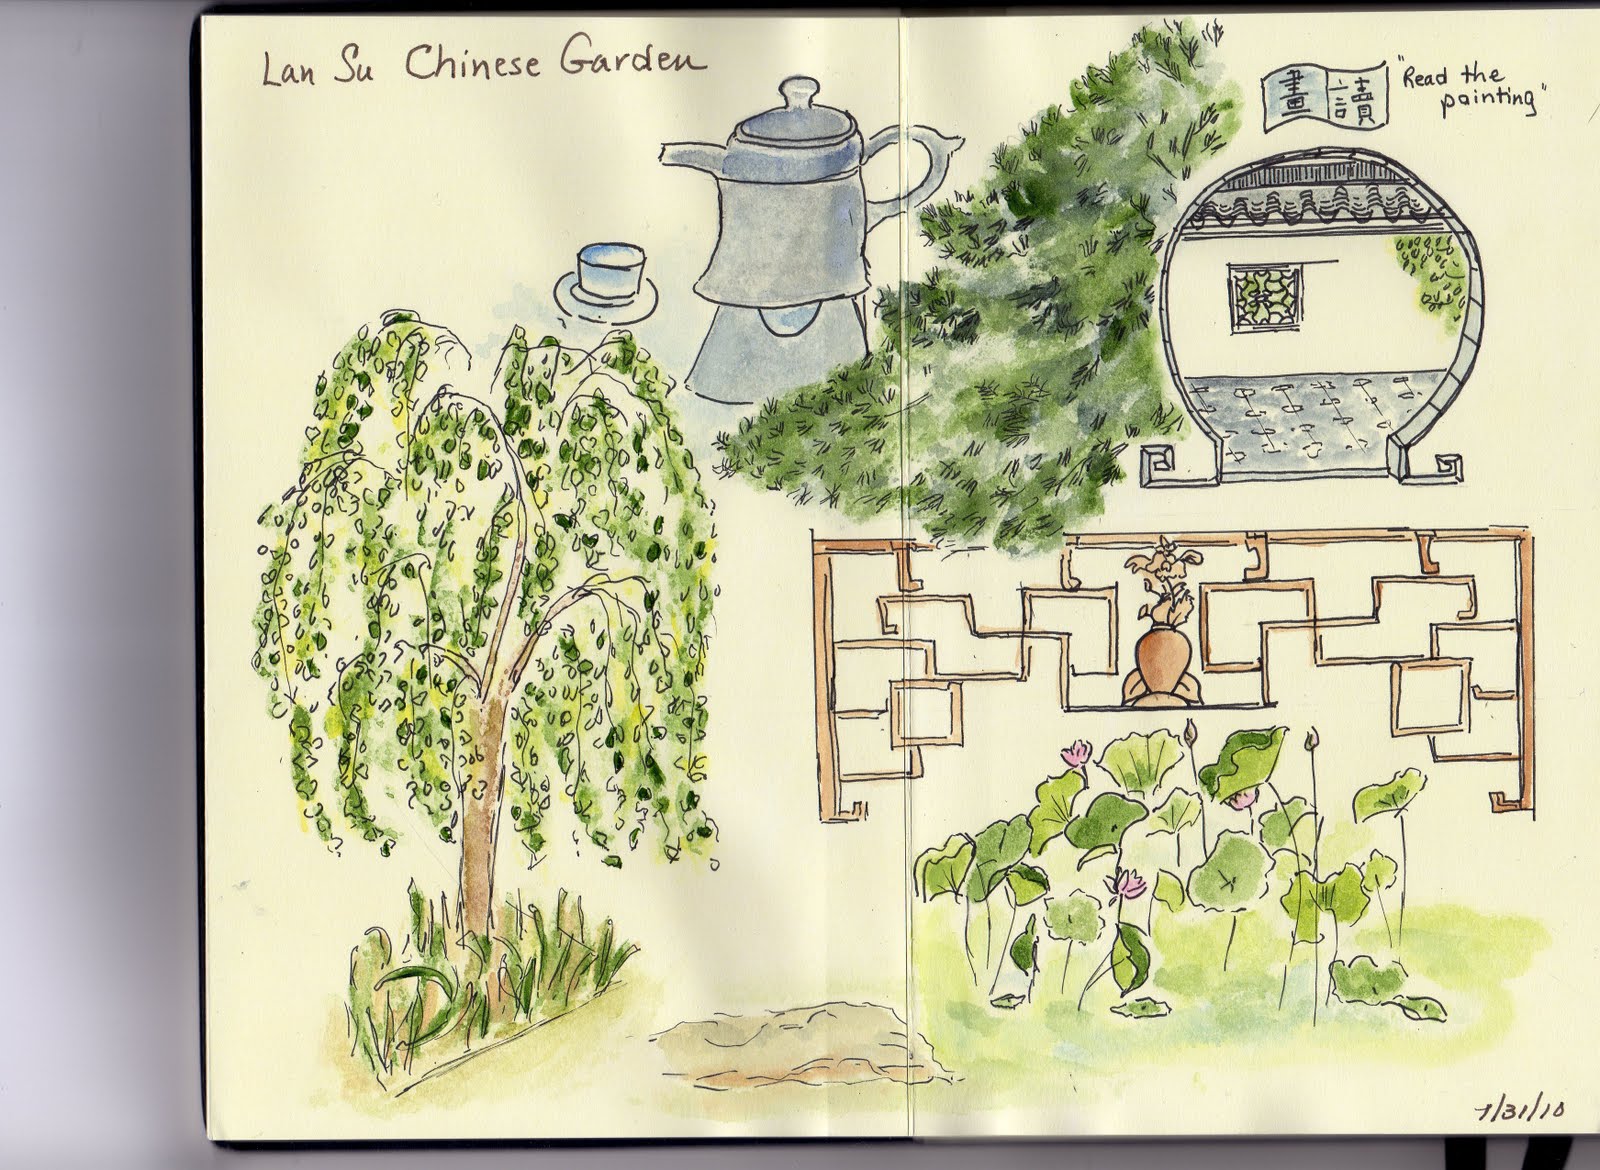 Lu San Chinese Garden and